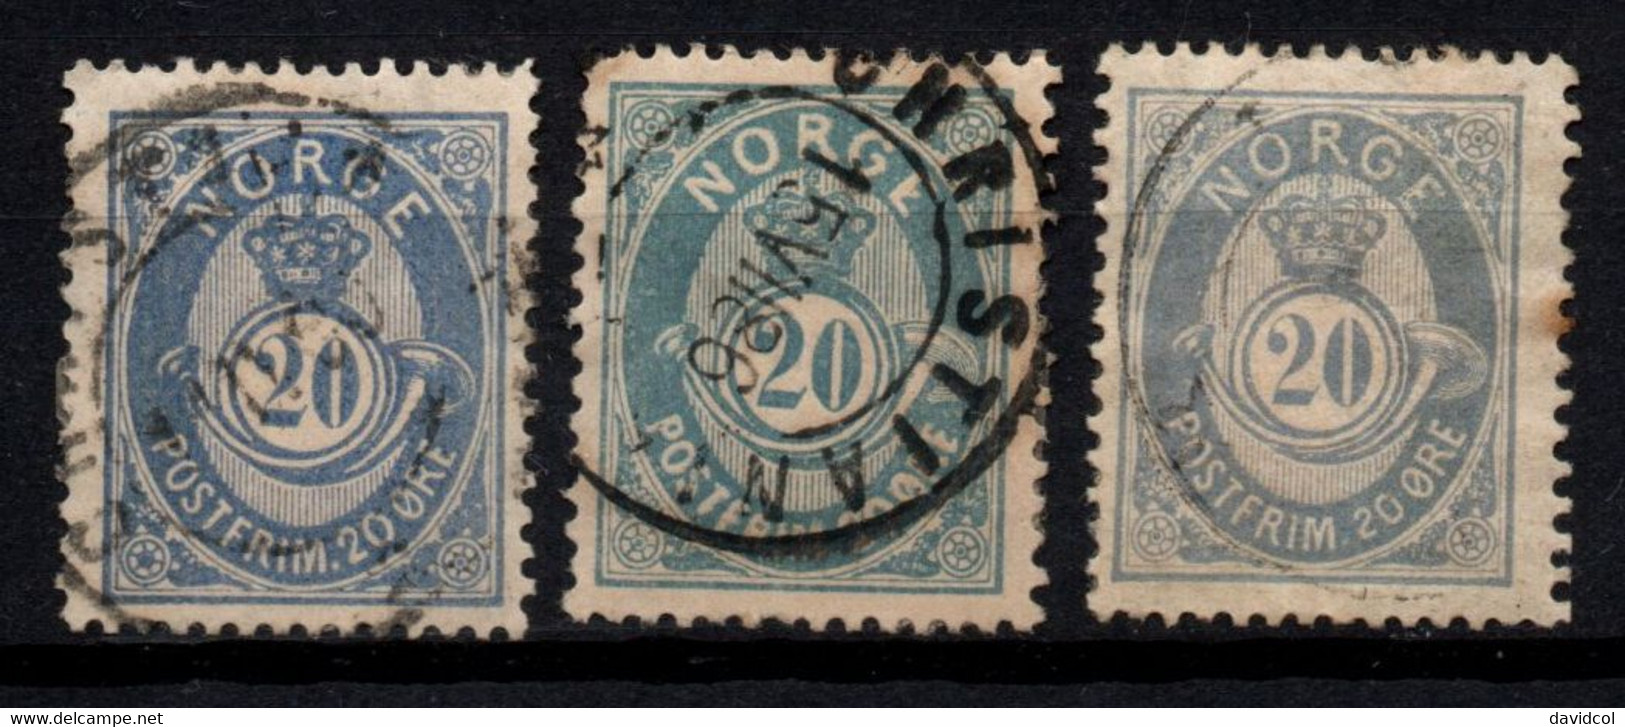 069- NORWAY 1882-1893 - SCOTT#: 44 - USED - 20 O - POSTHORN AND CROWN - Usados